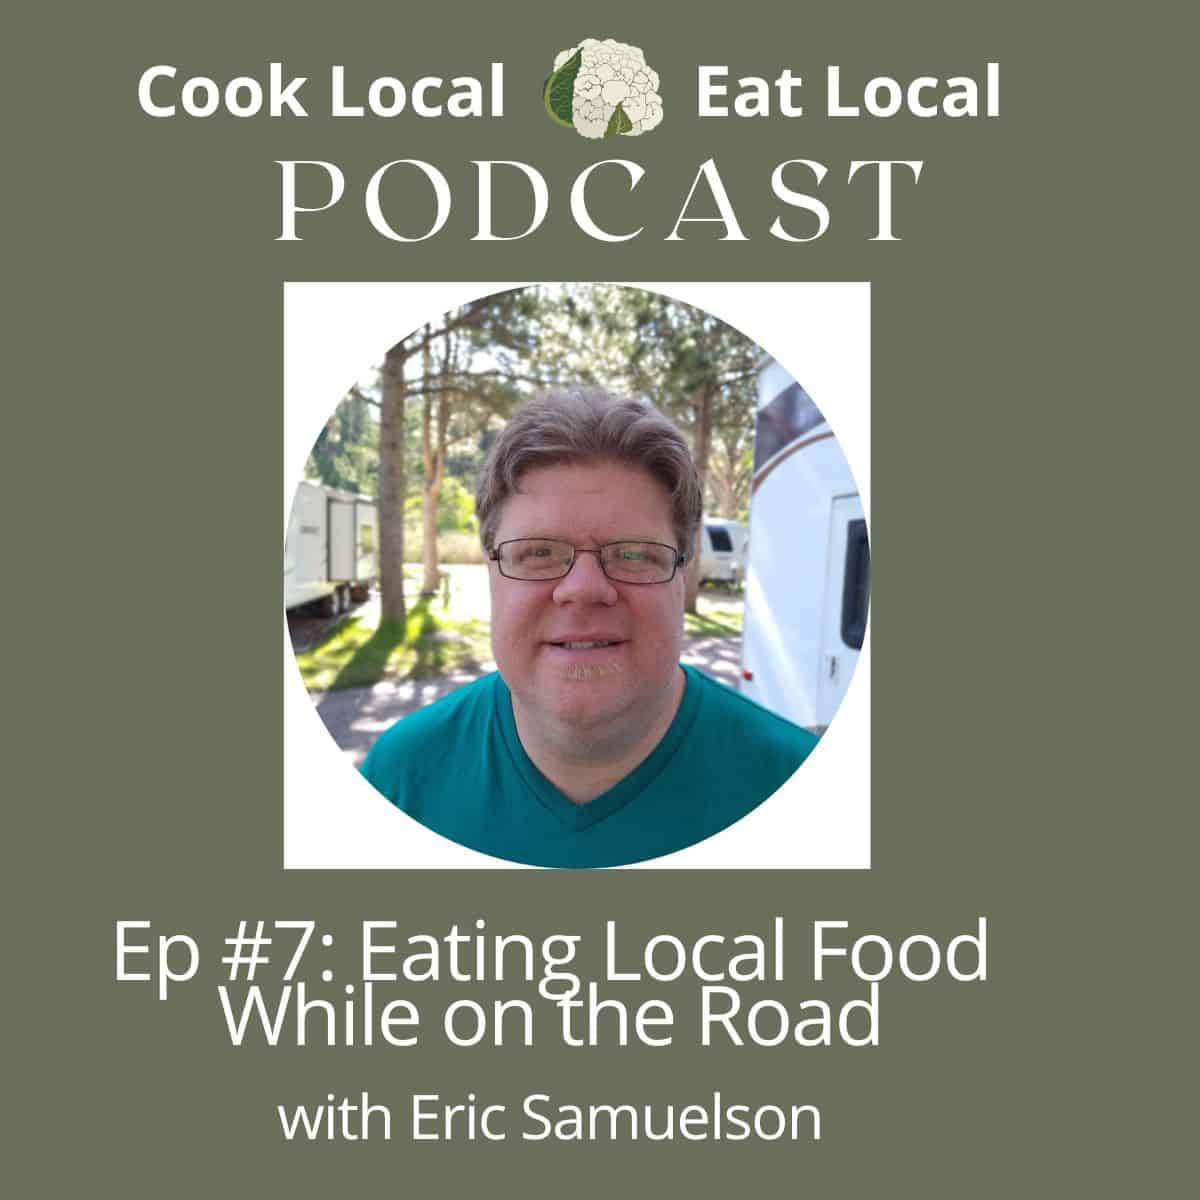 Podcast episode cover graphic with a photo of Eric Samuelson from Eat Like No One Else, along with text with the episode title "eating local food while traveling".